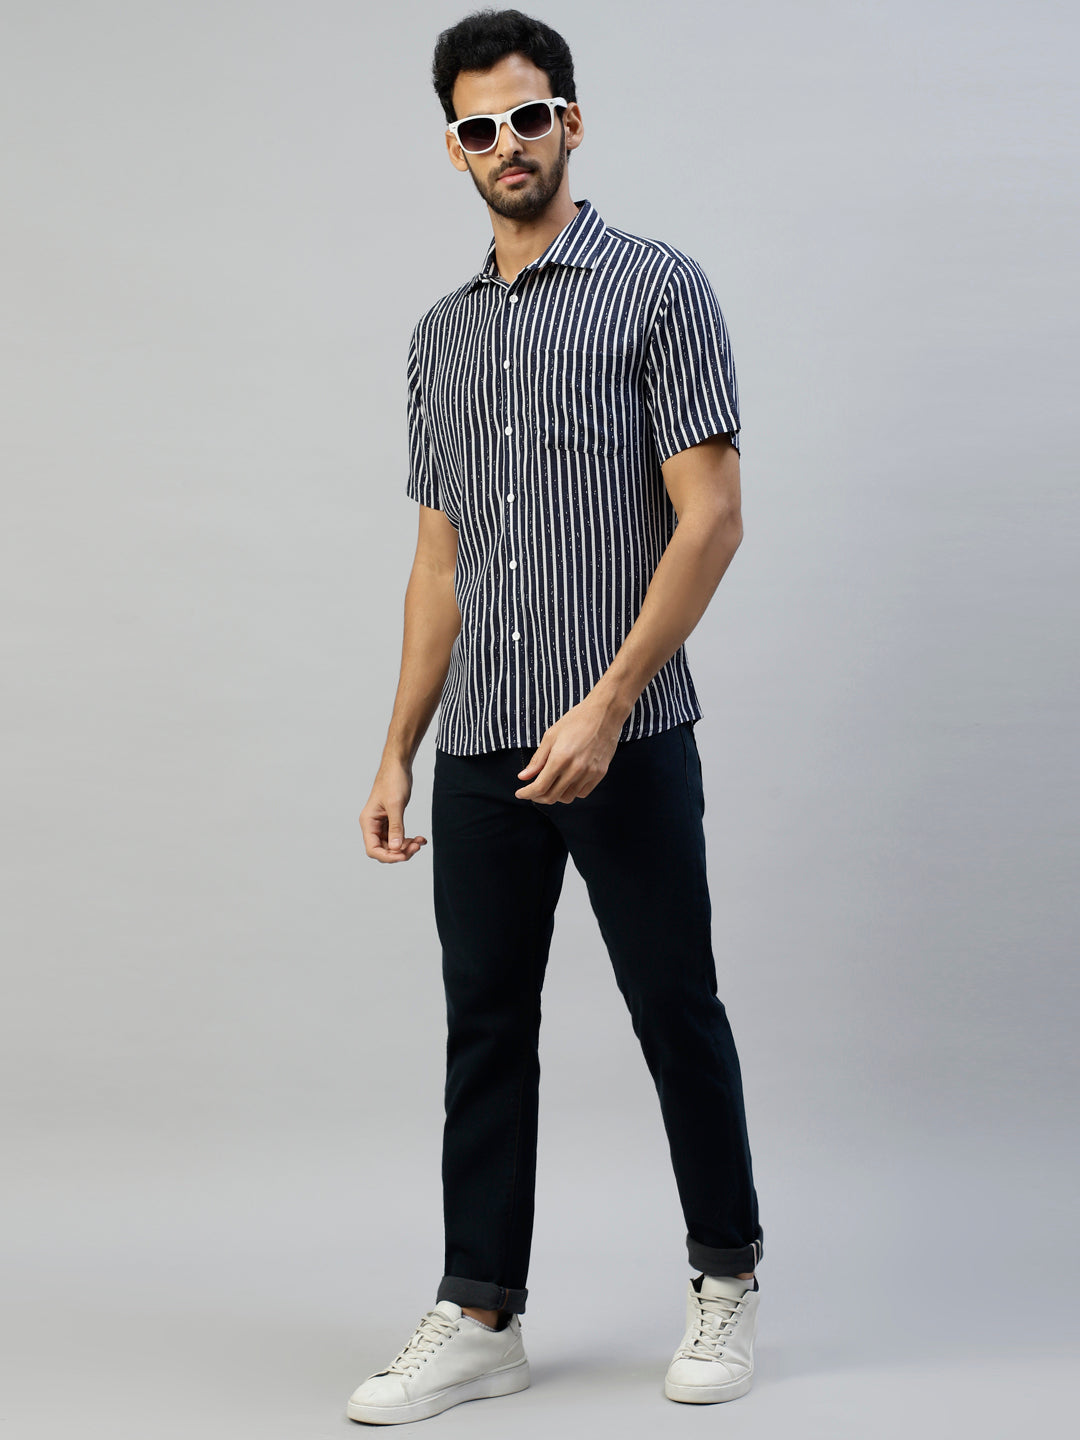 Don Vino Men's Slim Fit Navy Blue Striped Shirt with Half Sleeves